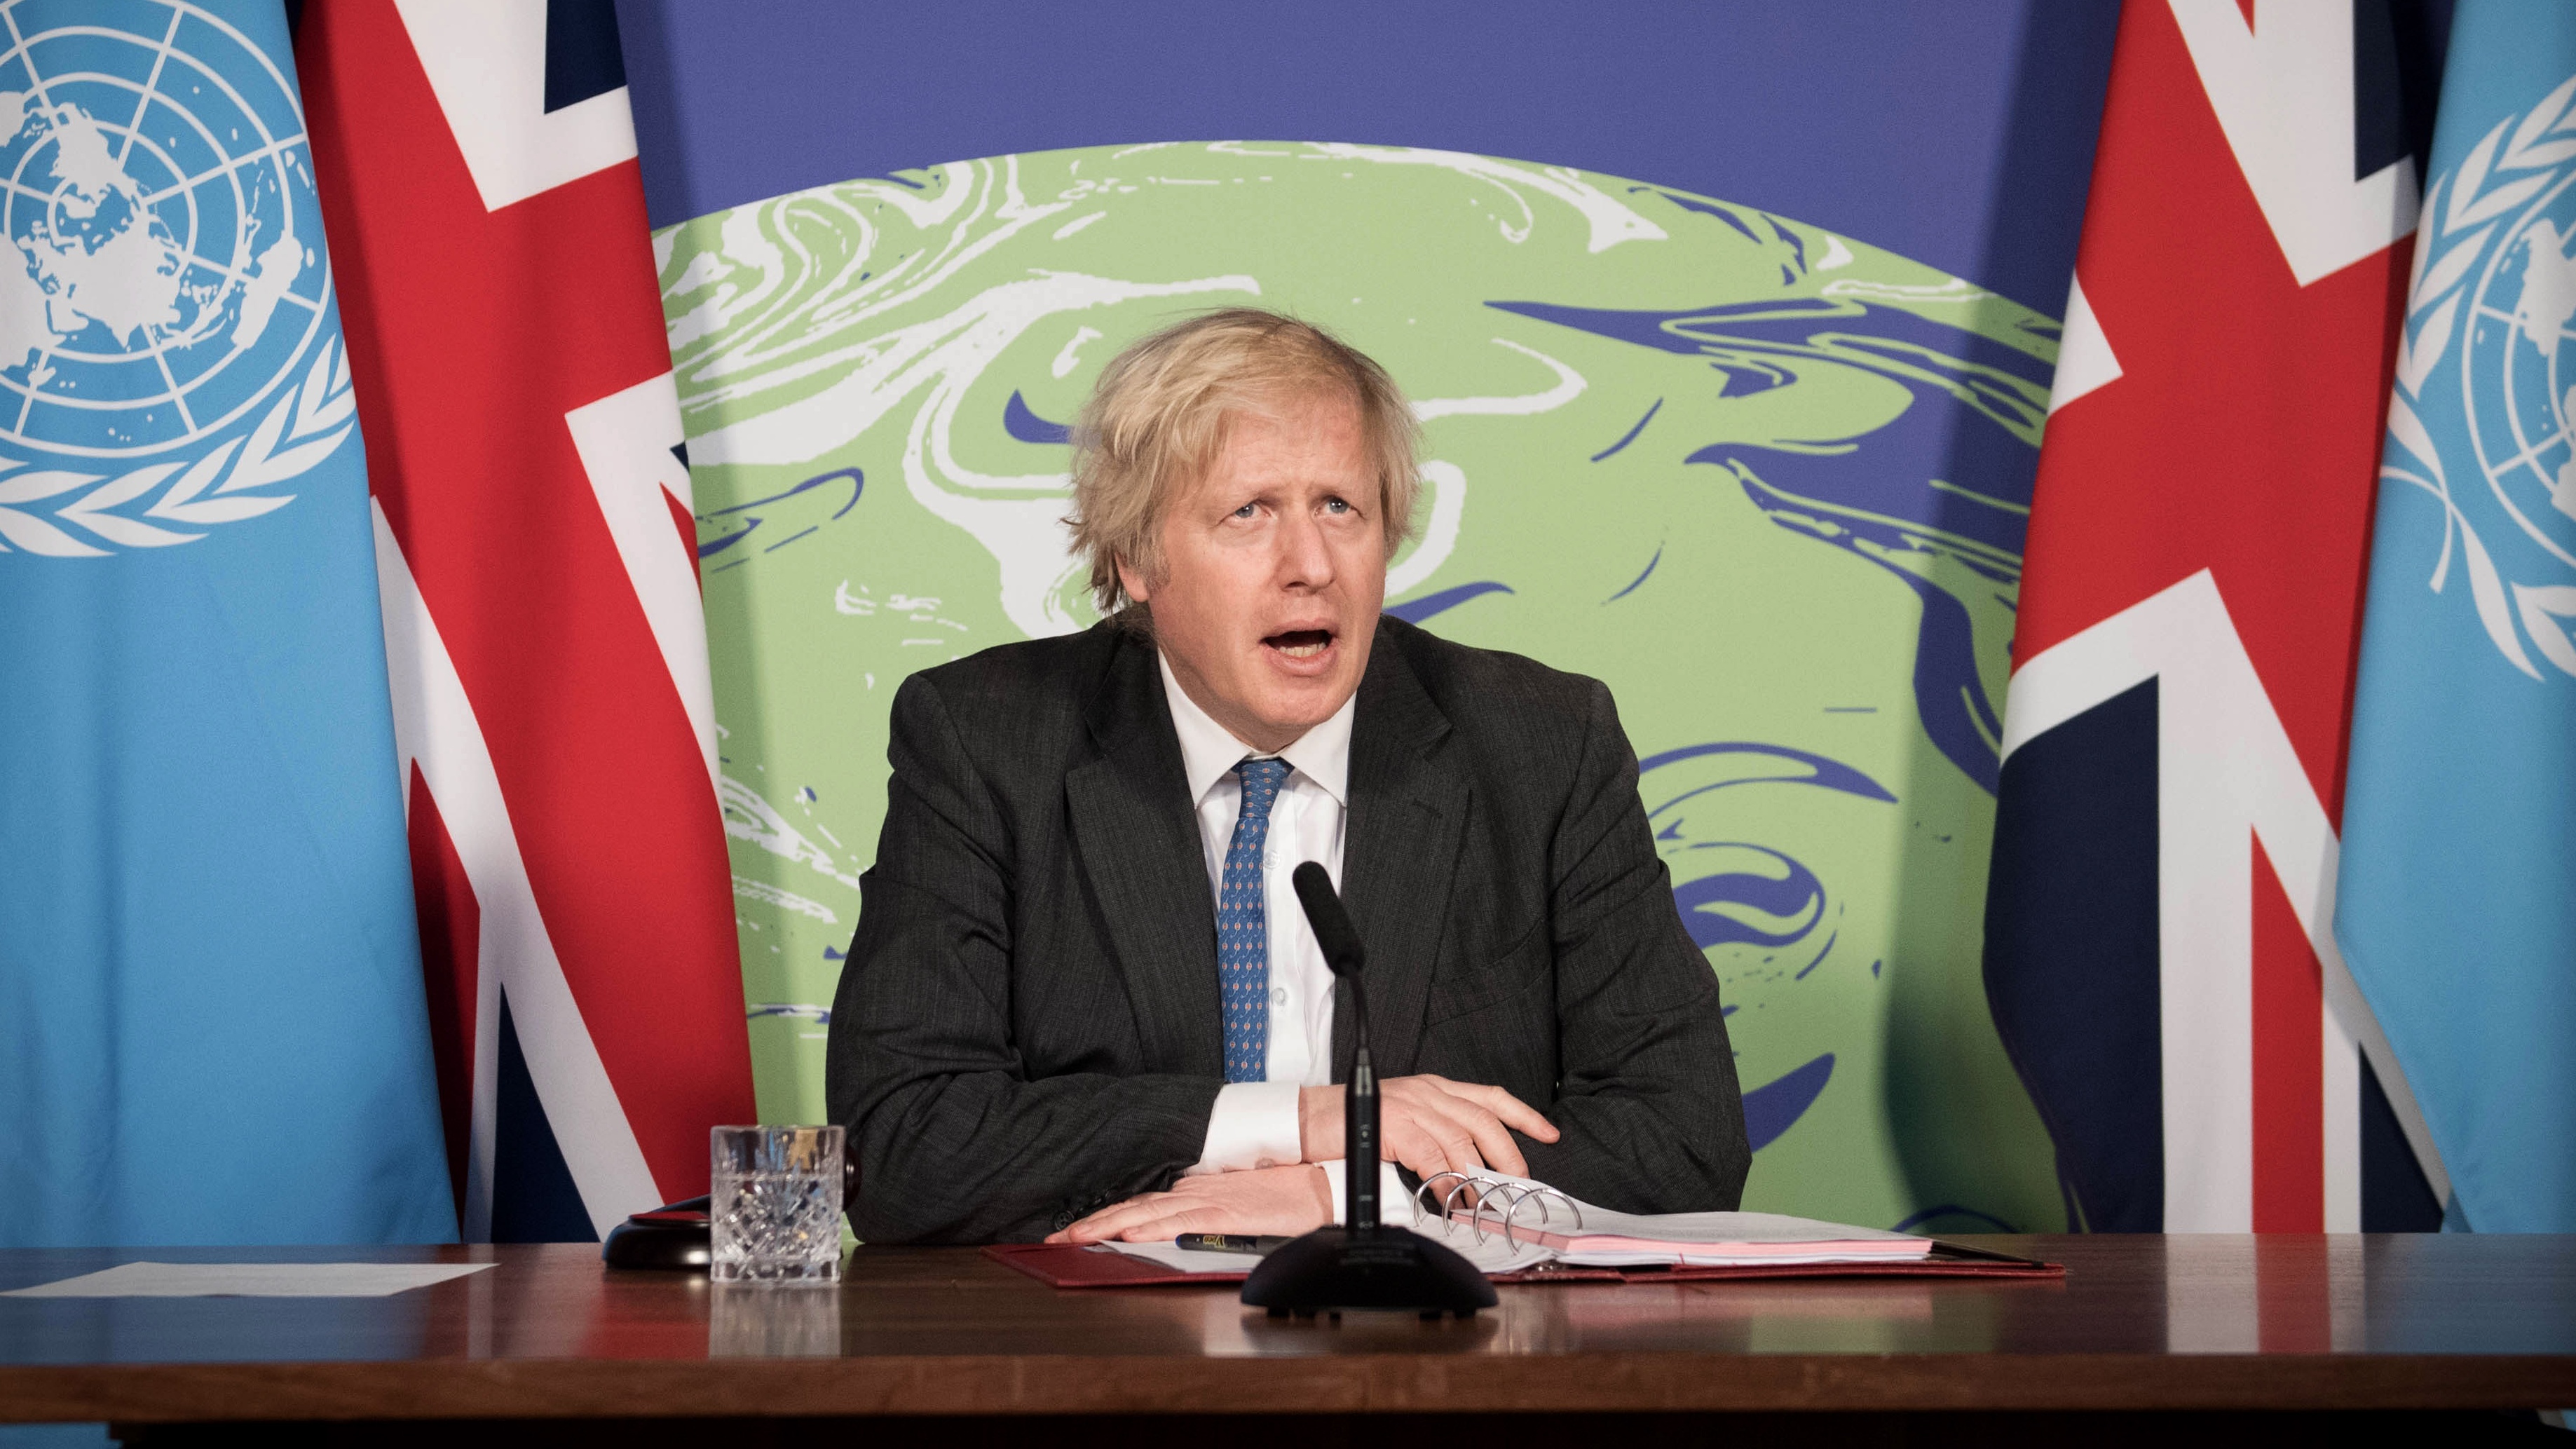 Boris Johnson chairs a session of the UN Security Council